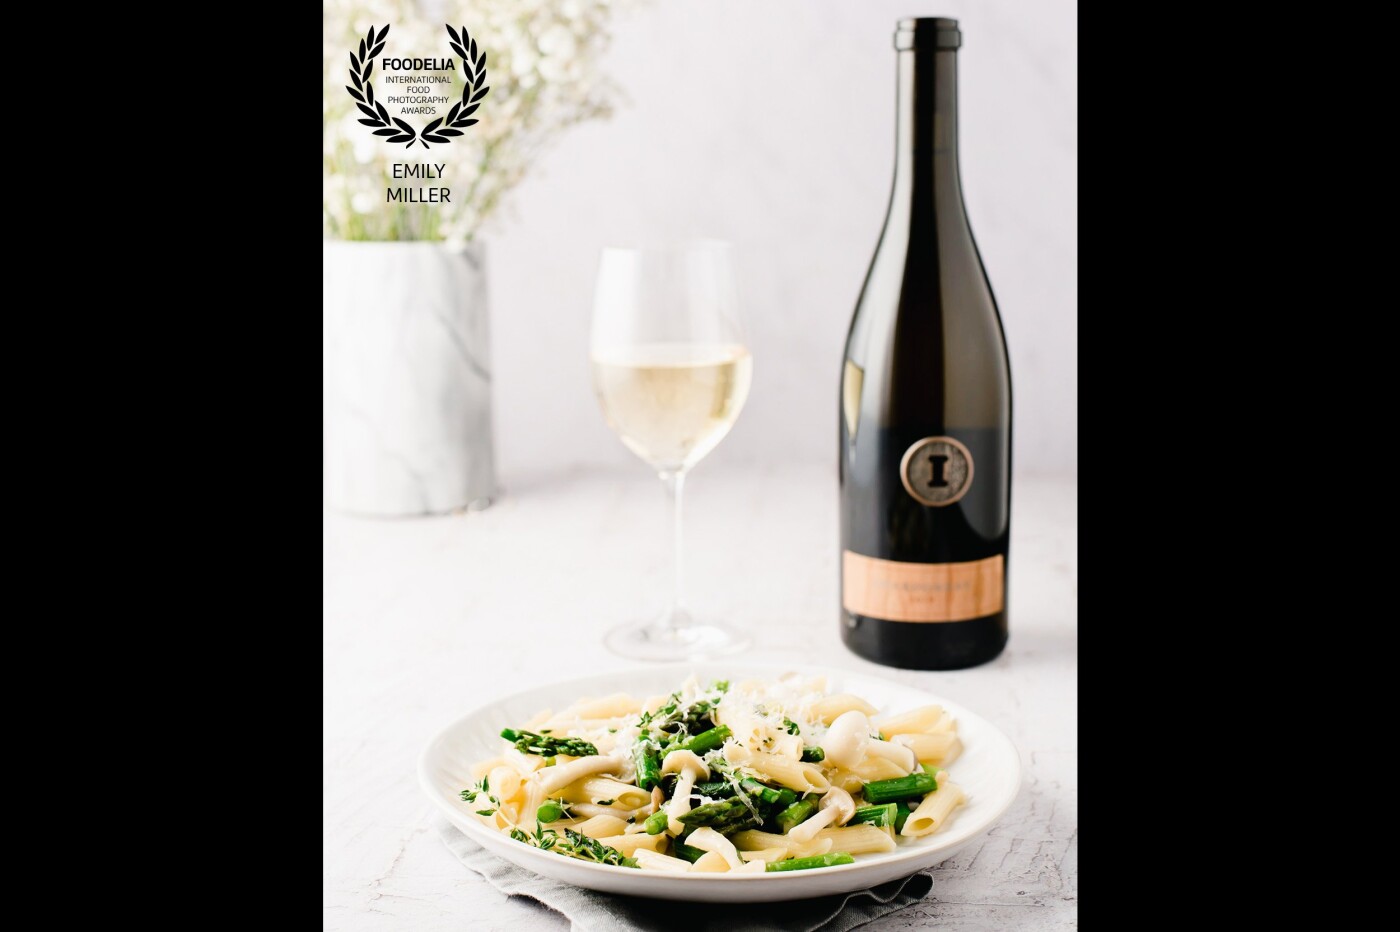 White plate with Vegan Asparagus Mushroom Pasta with Vegan Parmesan Cheese accompanied by a glass of Chardonnay and wine bottle in a bright and airy style with white background and green and white flowers in a marble vase.